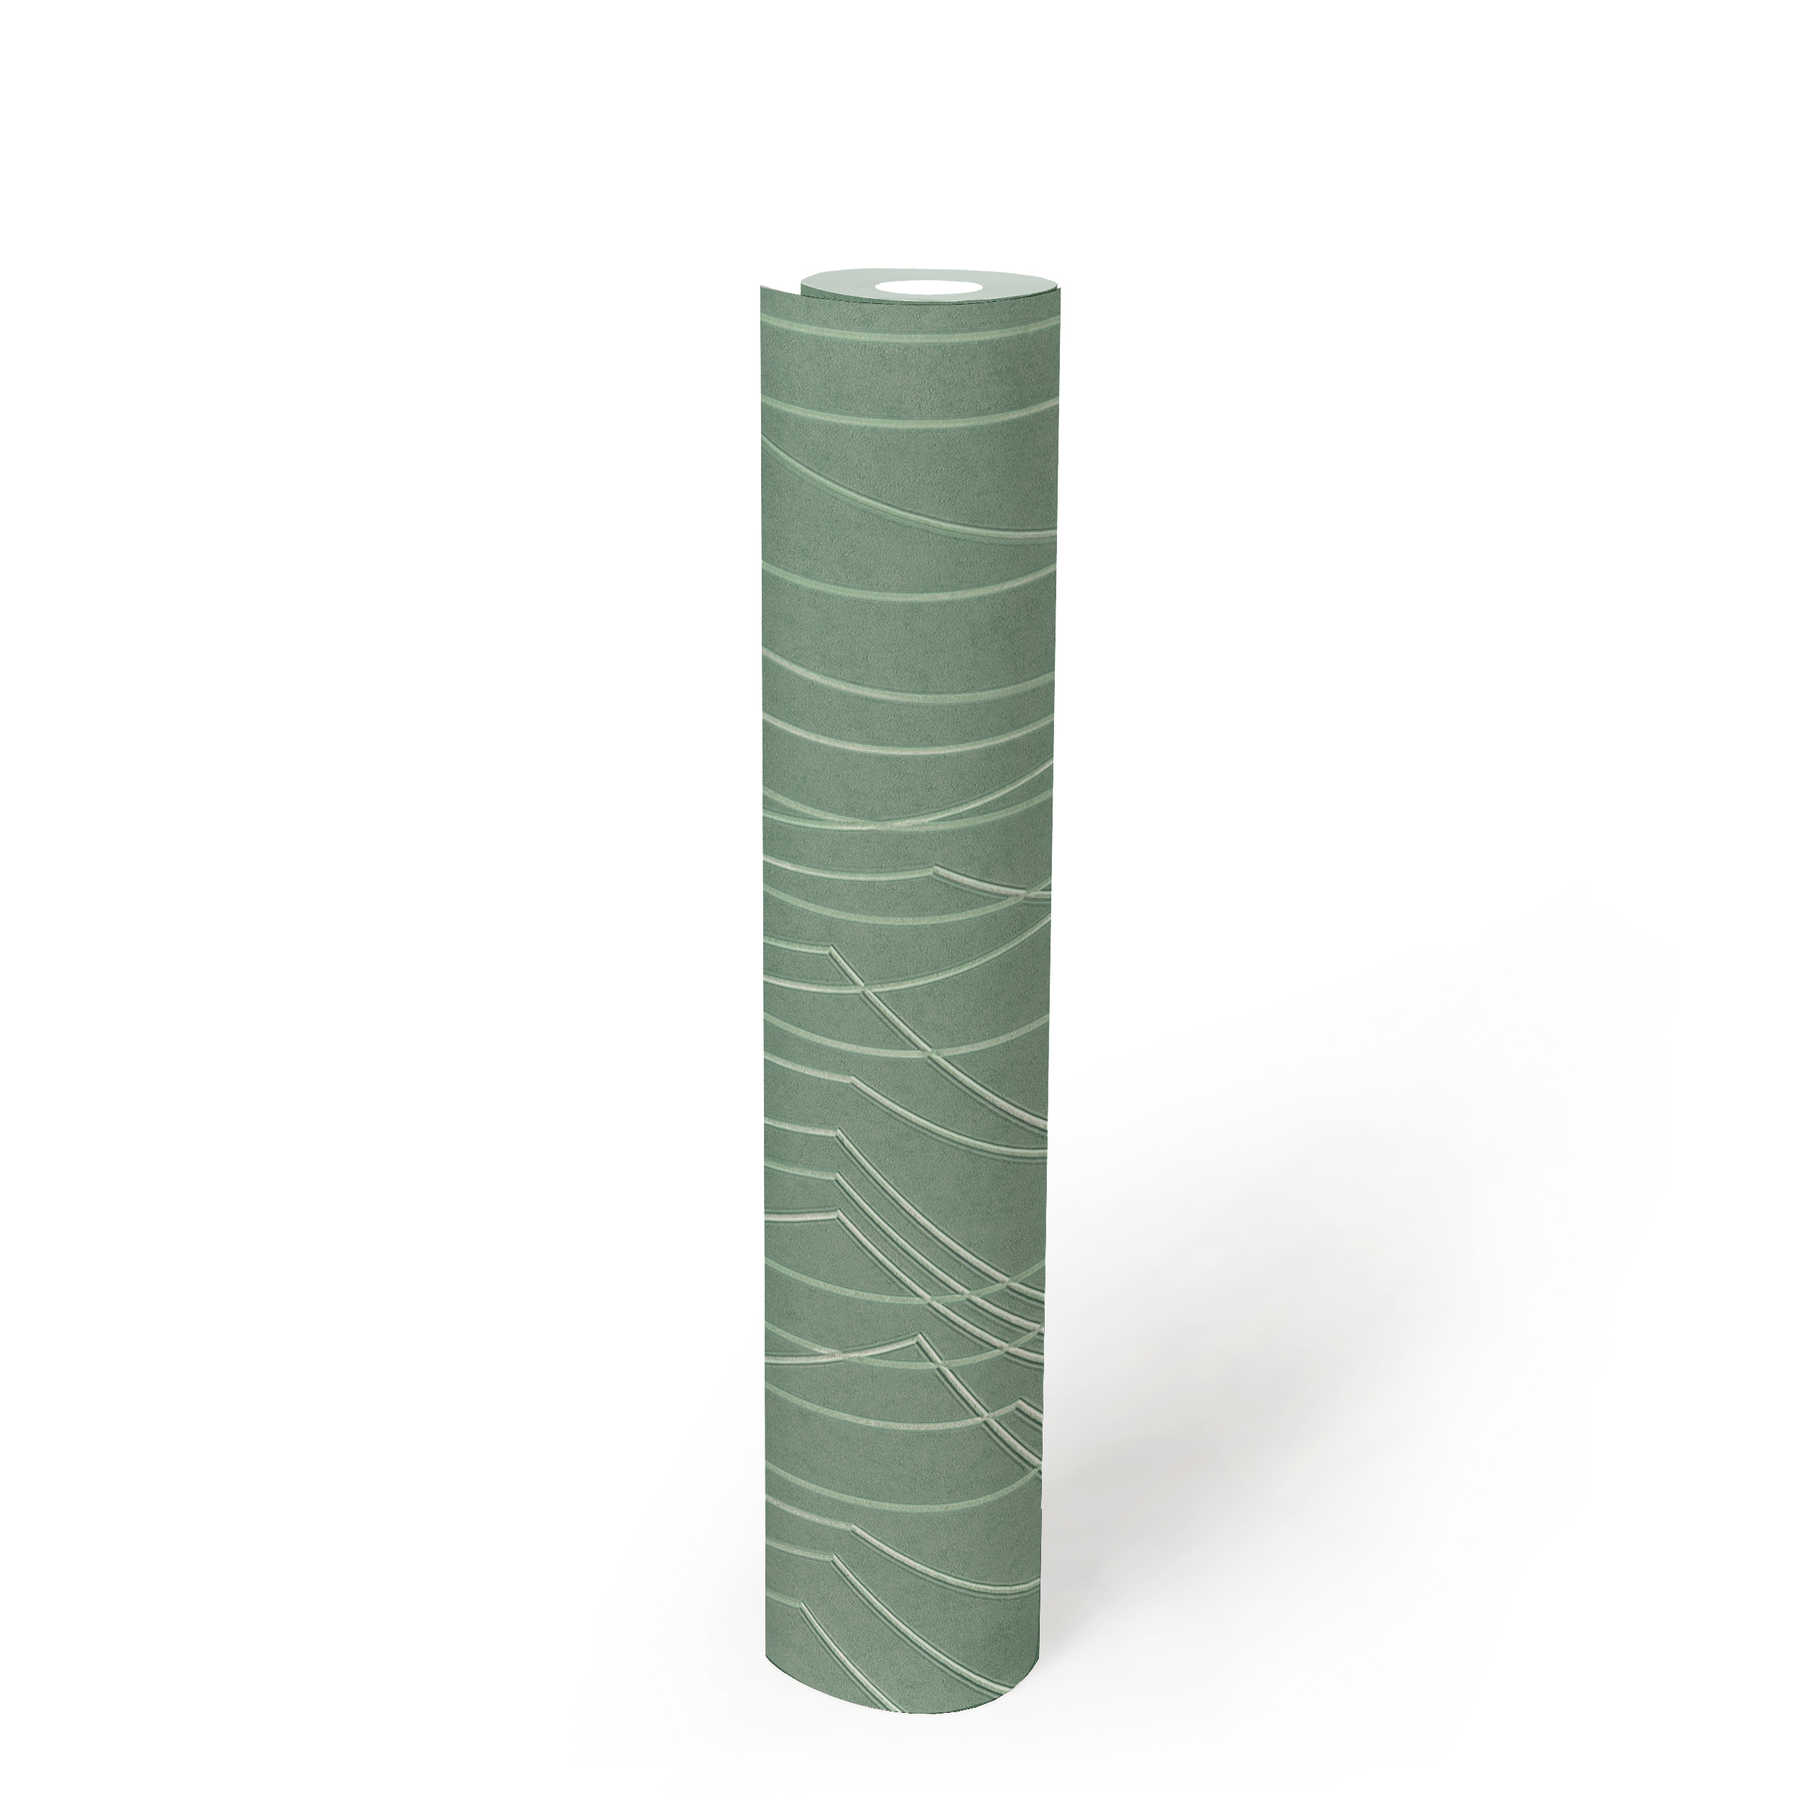             Green non-woven wallpaper with embossed pattern - green
        